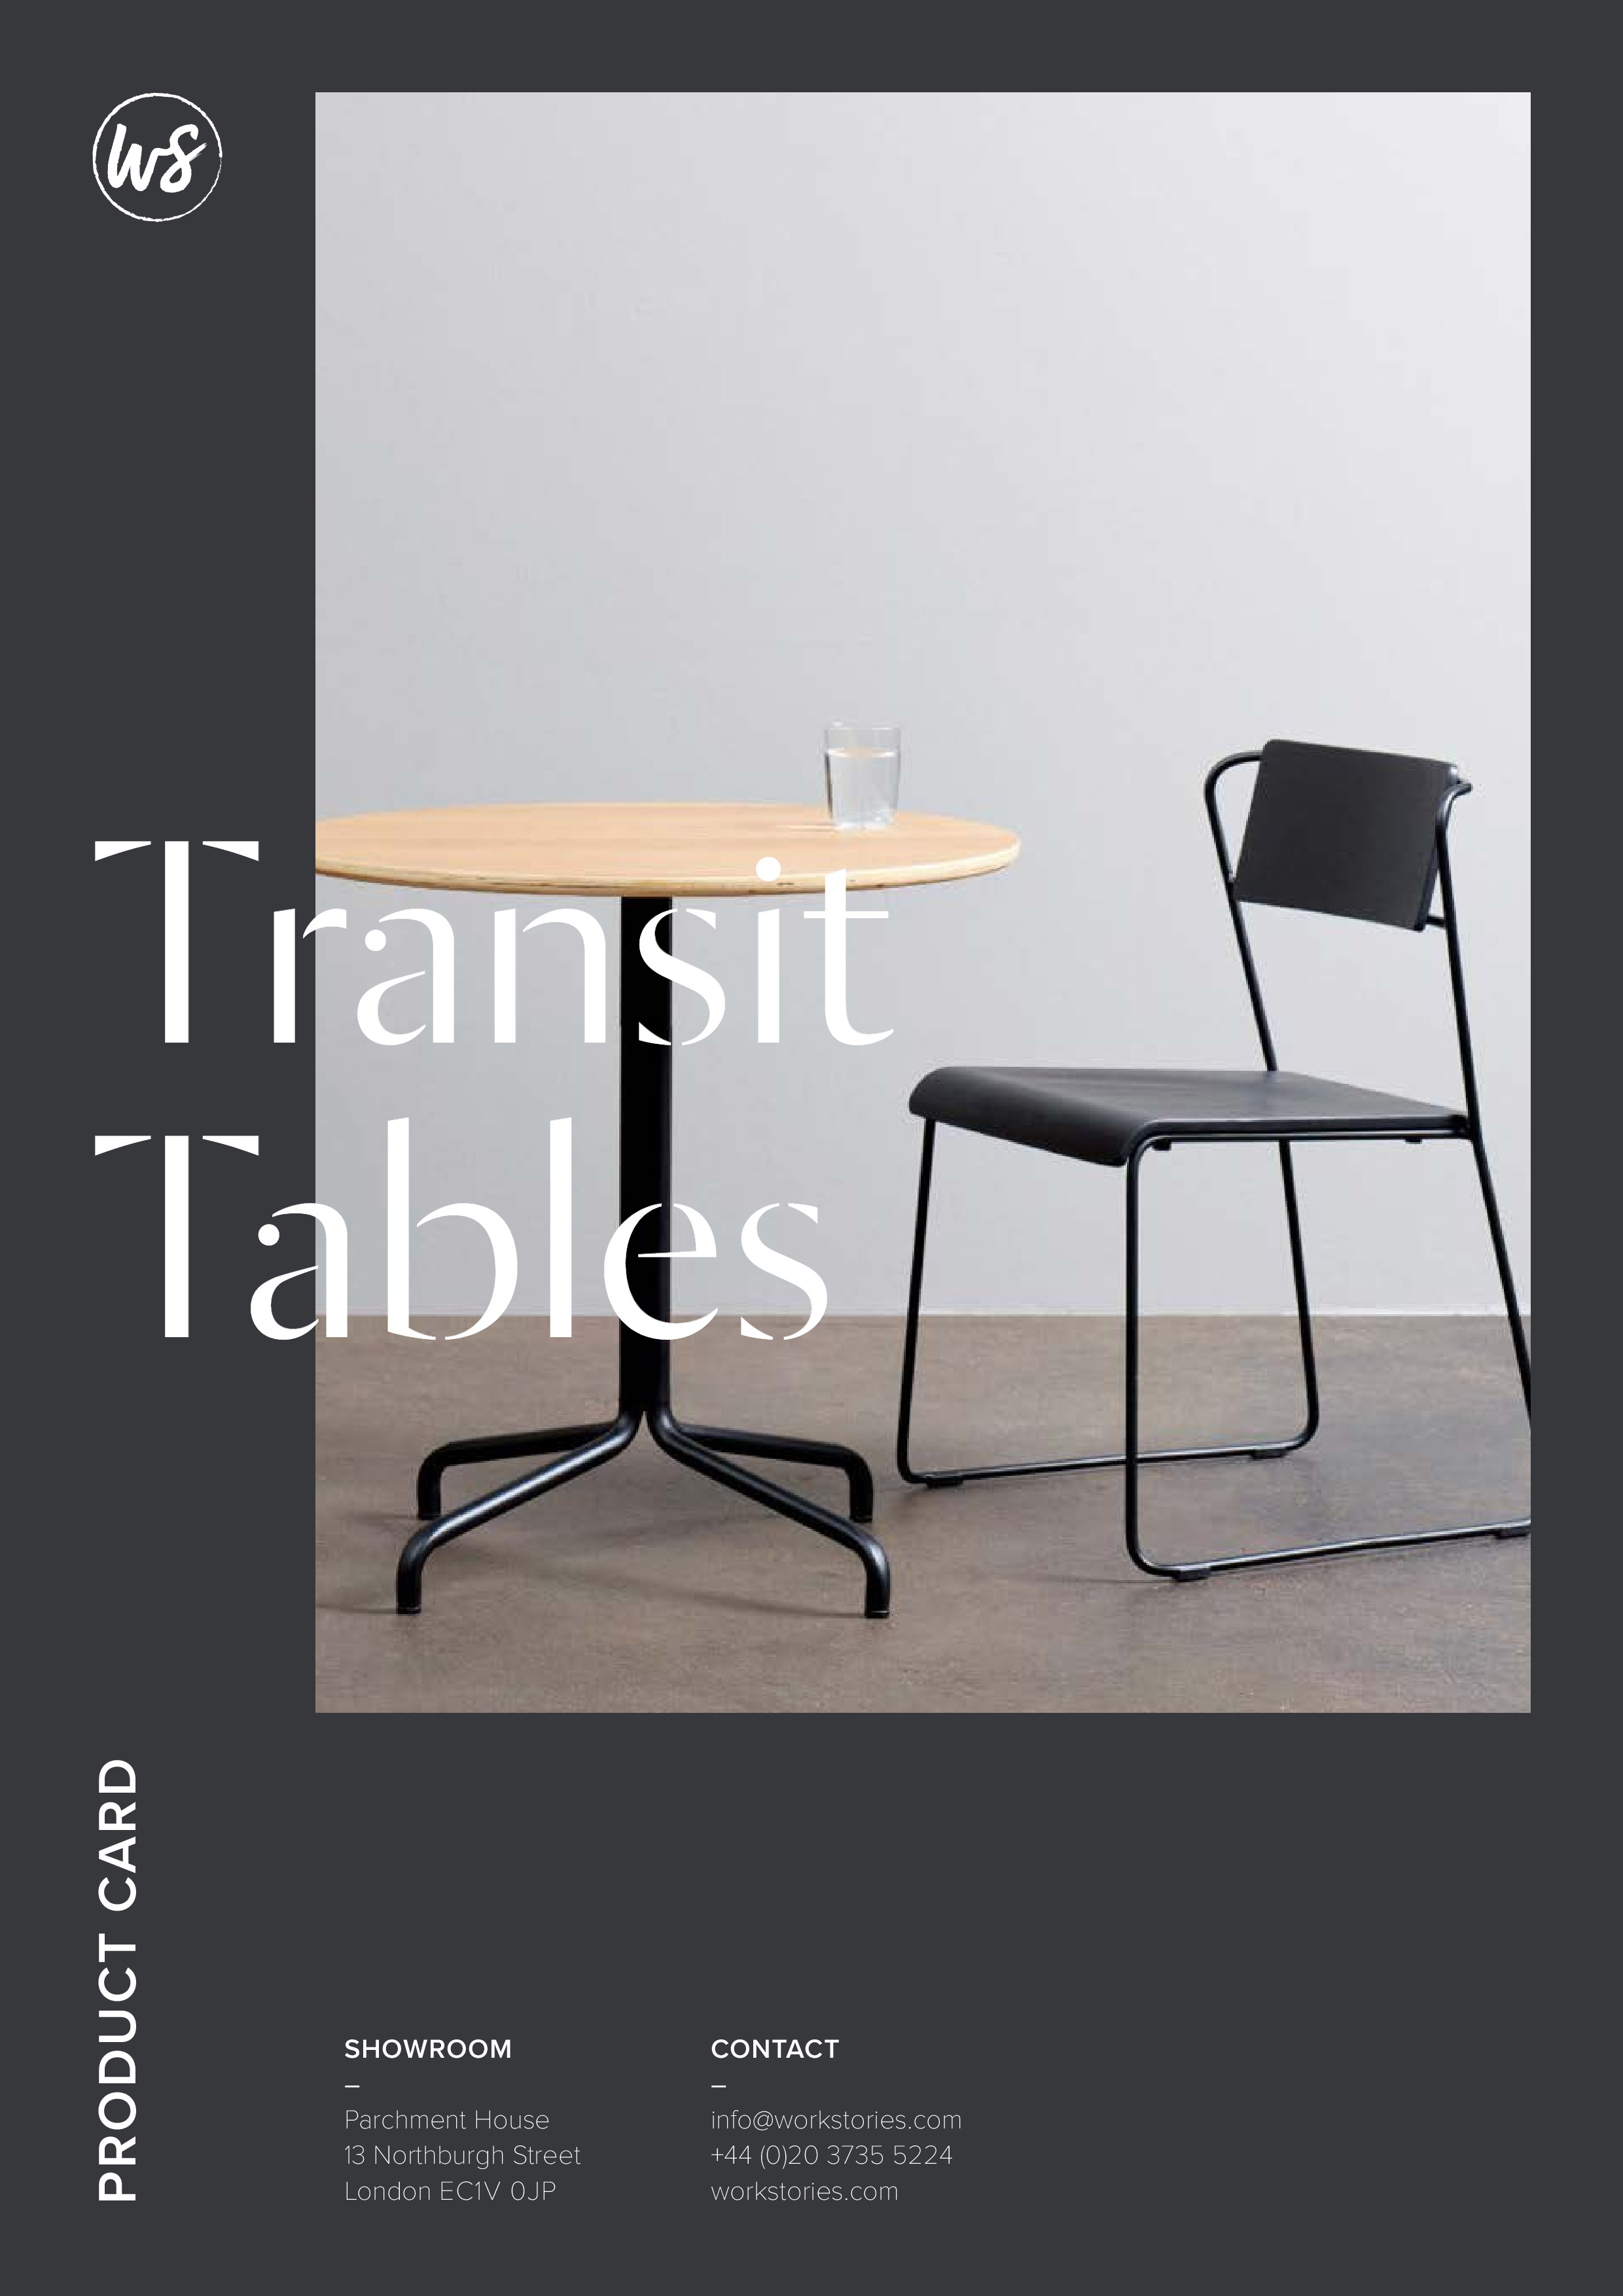 WS - Transit tables - Product card